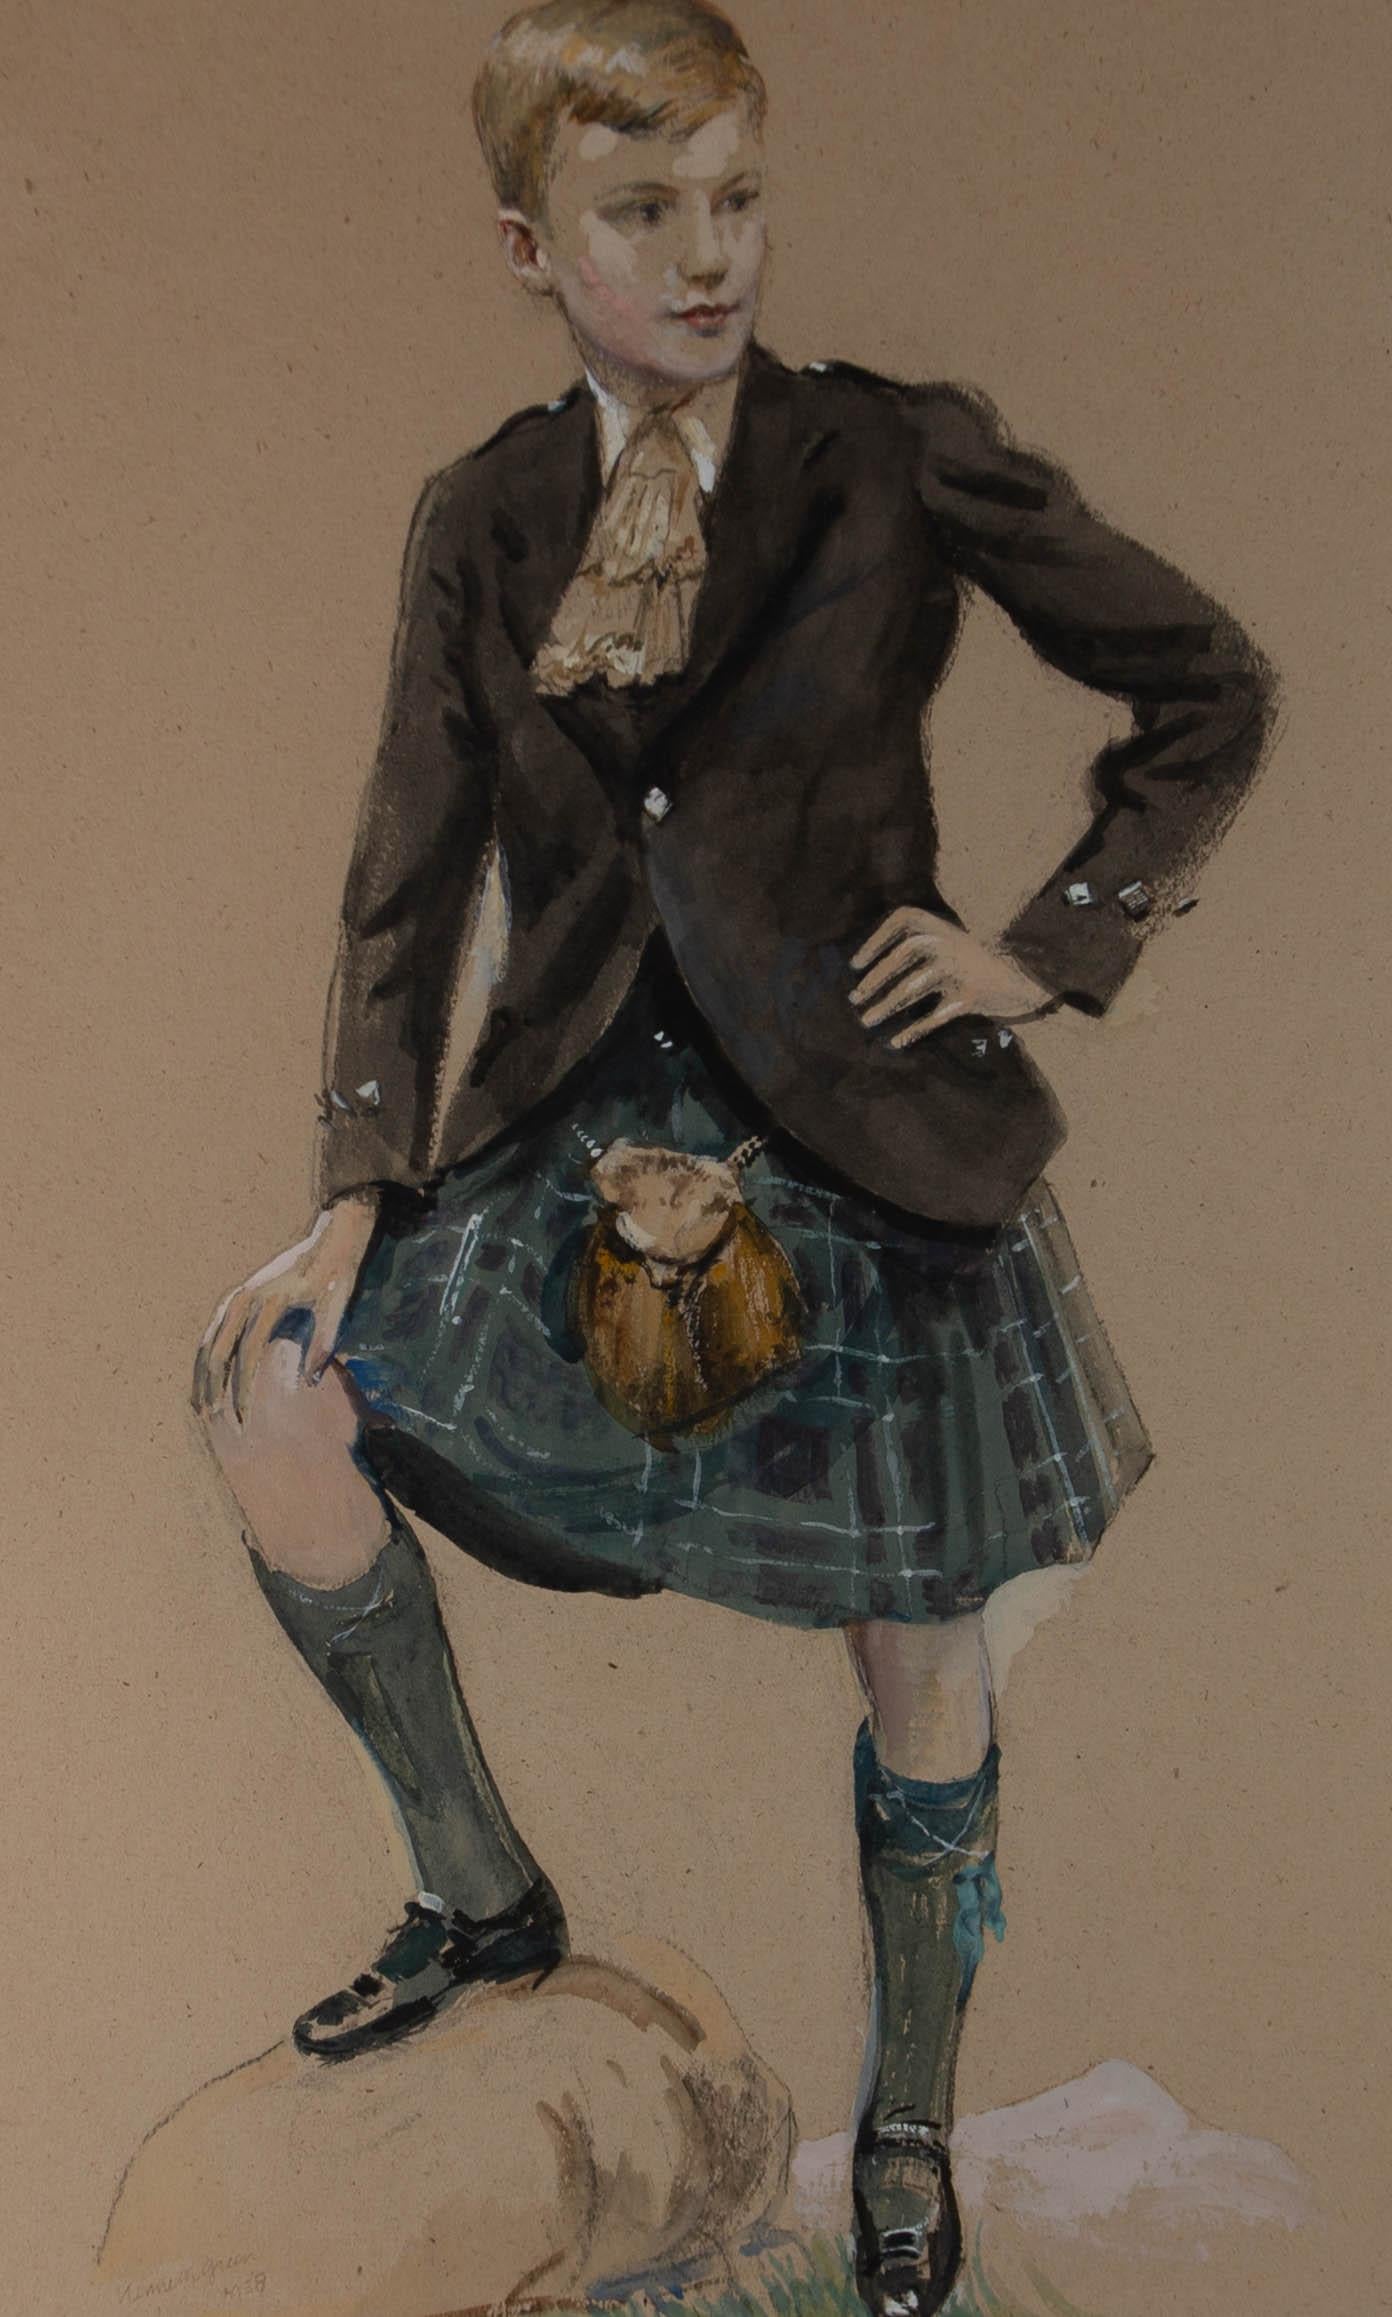 A fine and expressive watercolour painting with gouache and charcoal, by the artist Kenneth Green. The scene depicts a portrait of a young boy, possibly David Carritt, standing in a kilt. Signed and dated to the lower left-hand corner. Presented in